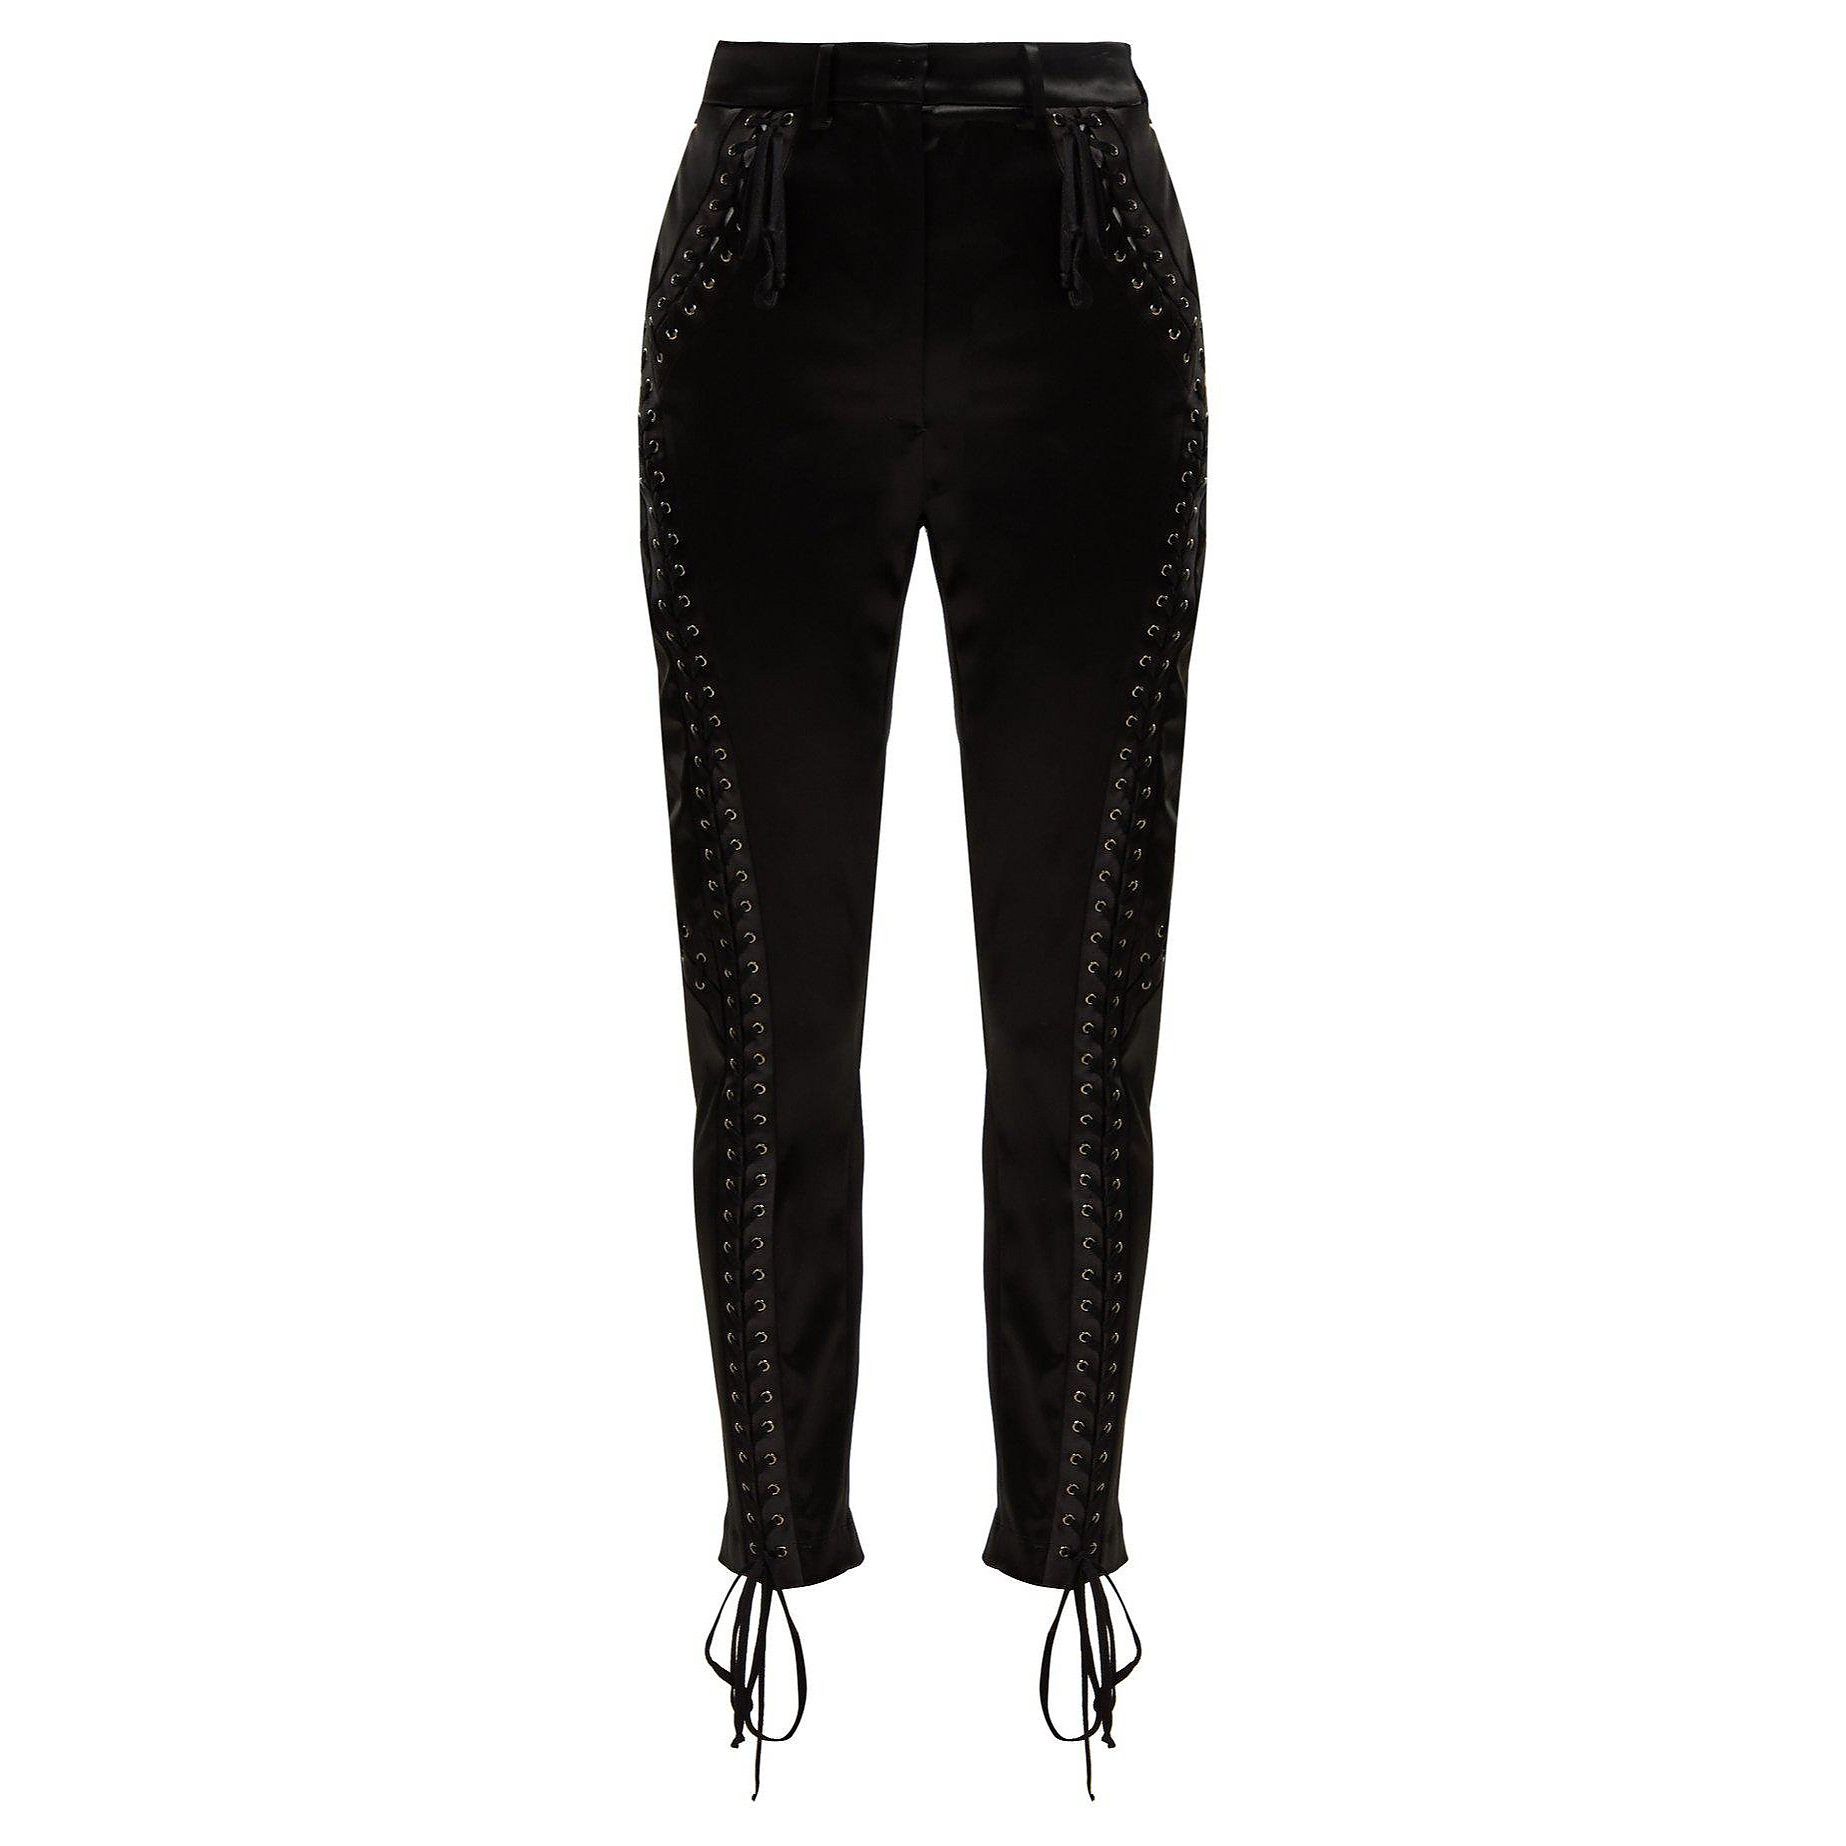 DOLCE & GABBANA Lace-Up Satin Trousers